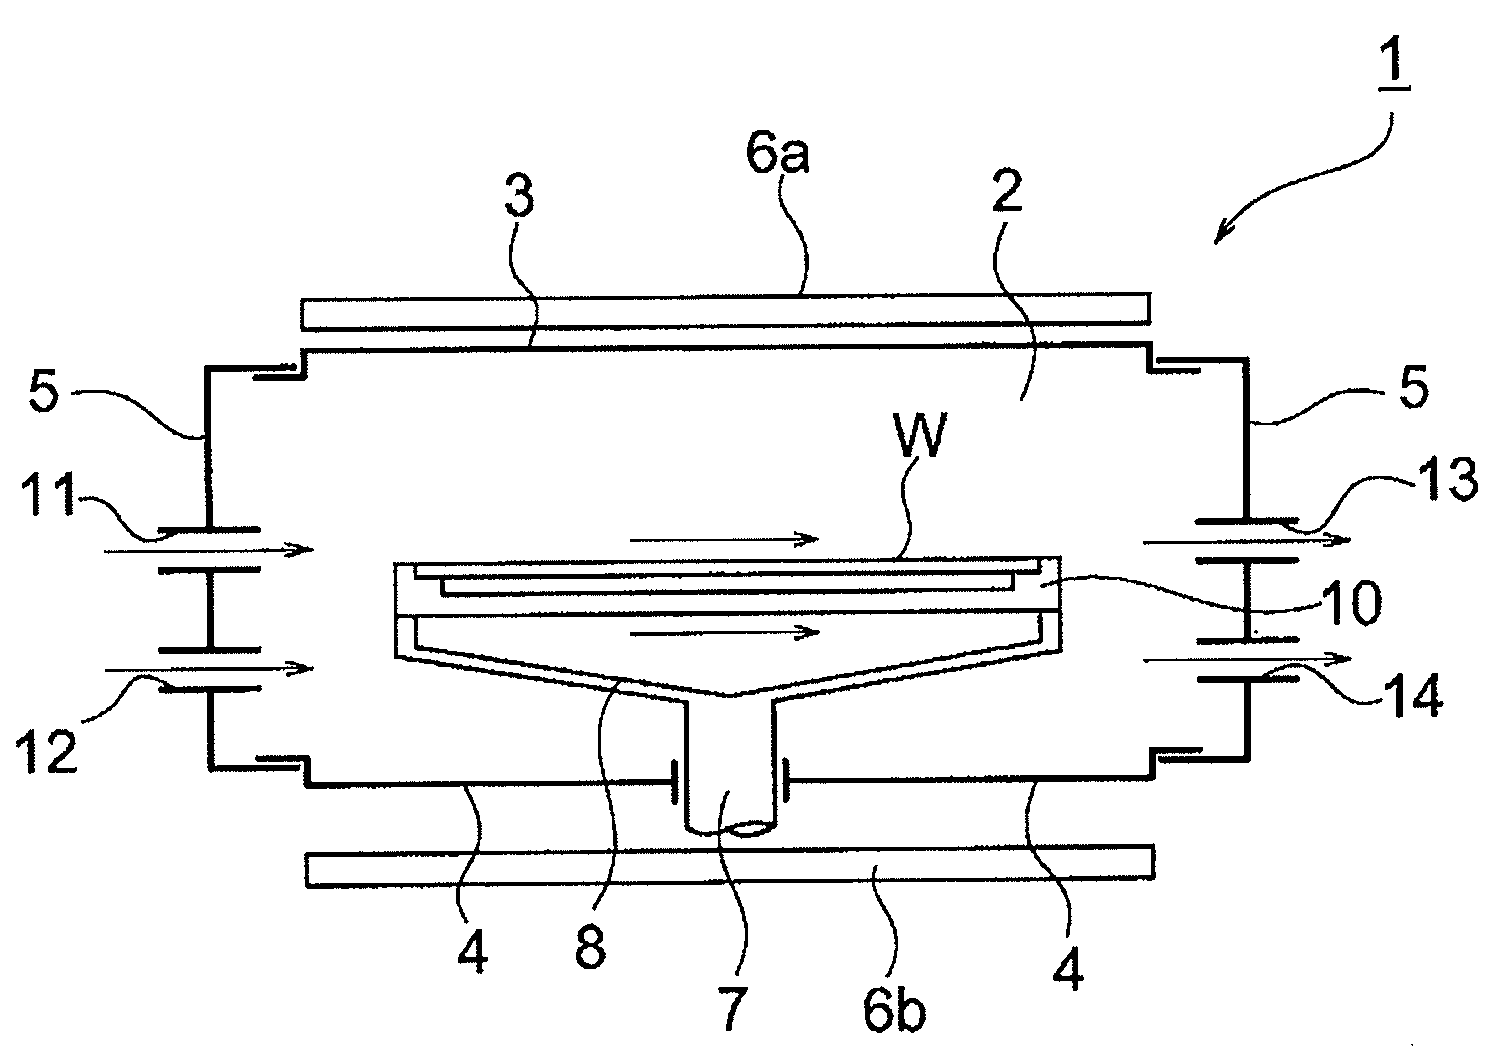 Susceptor for vapor phase epitaxial growth device